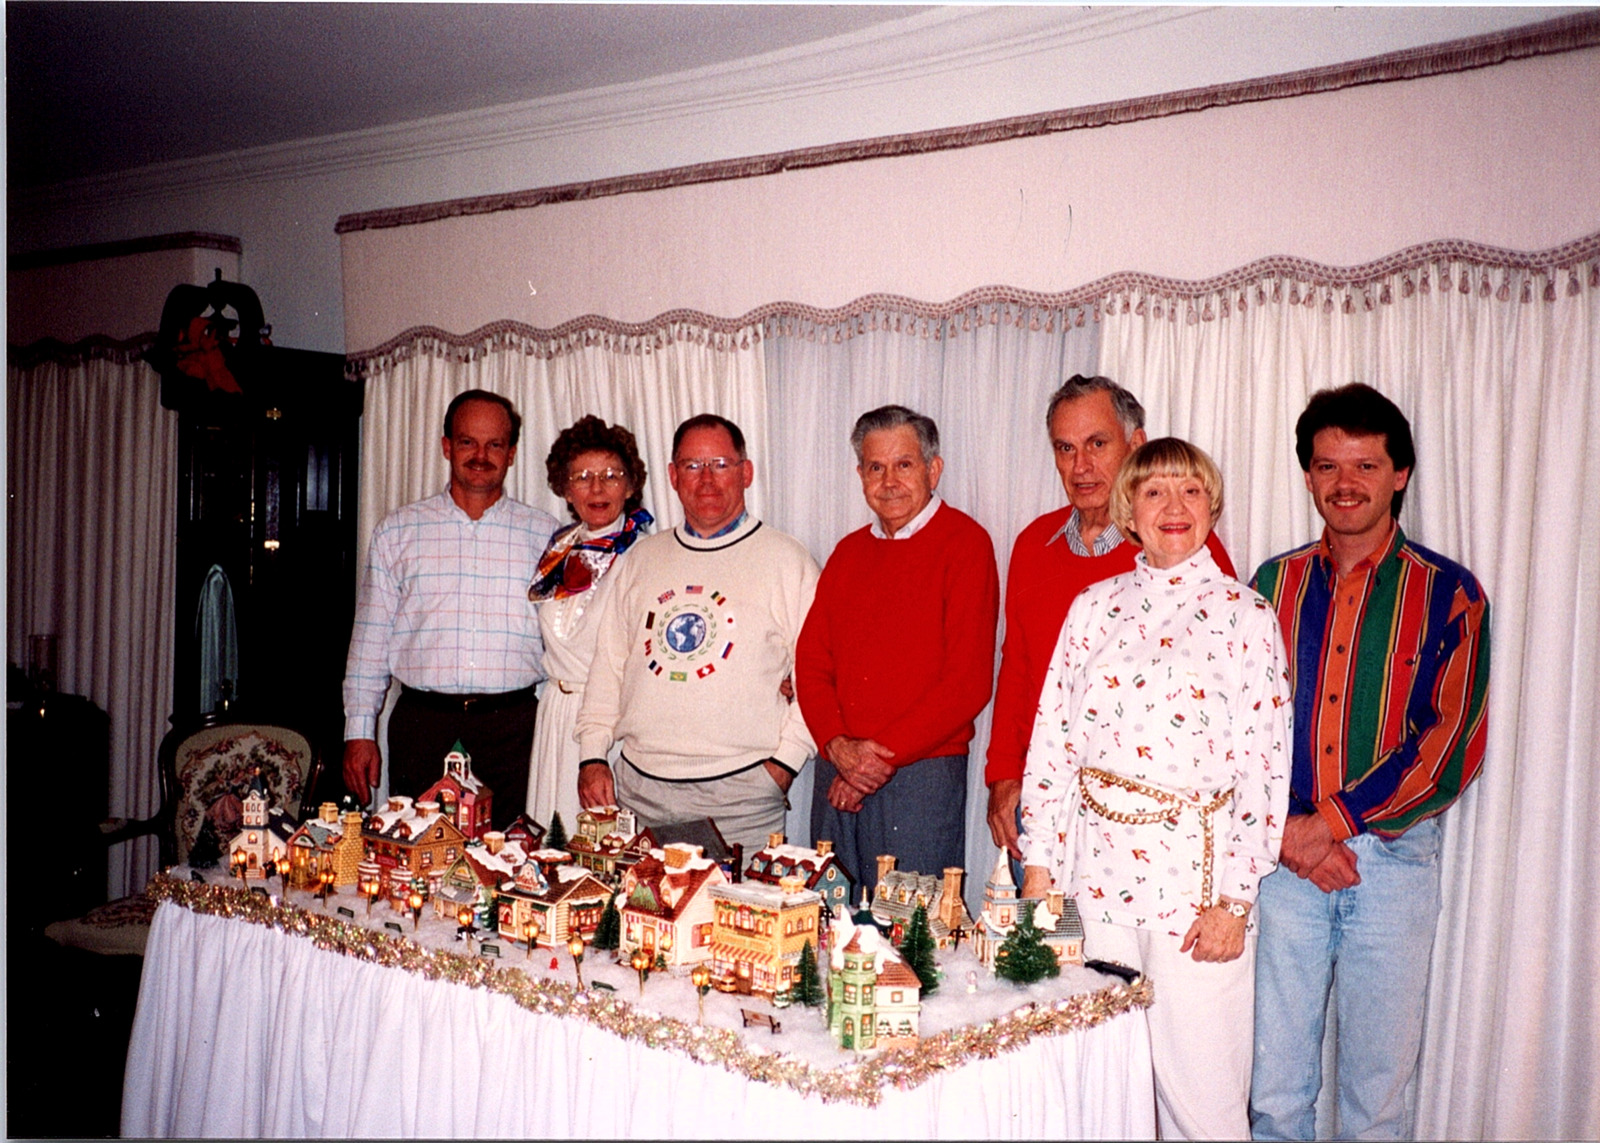 Vintage 1990s Found Photo - Family Poses Together With Pretty Christmas Village